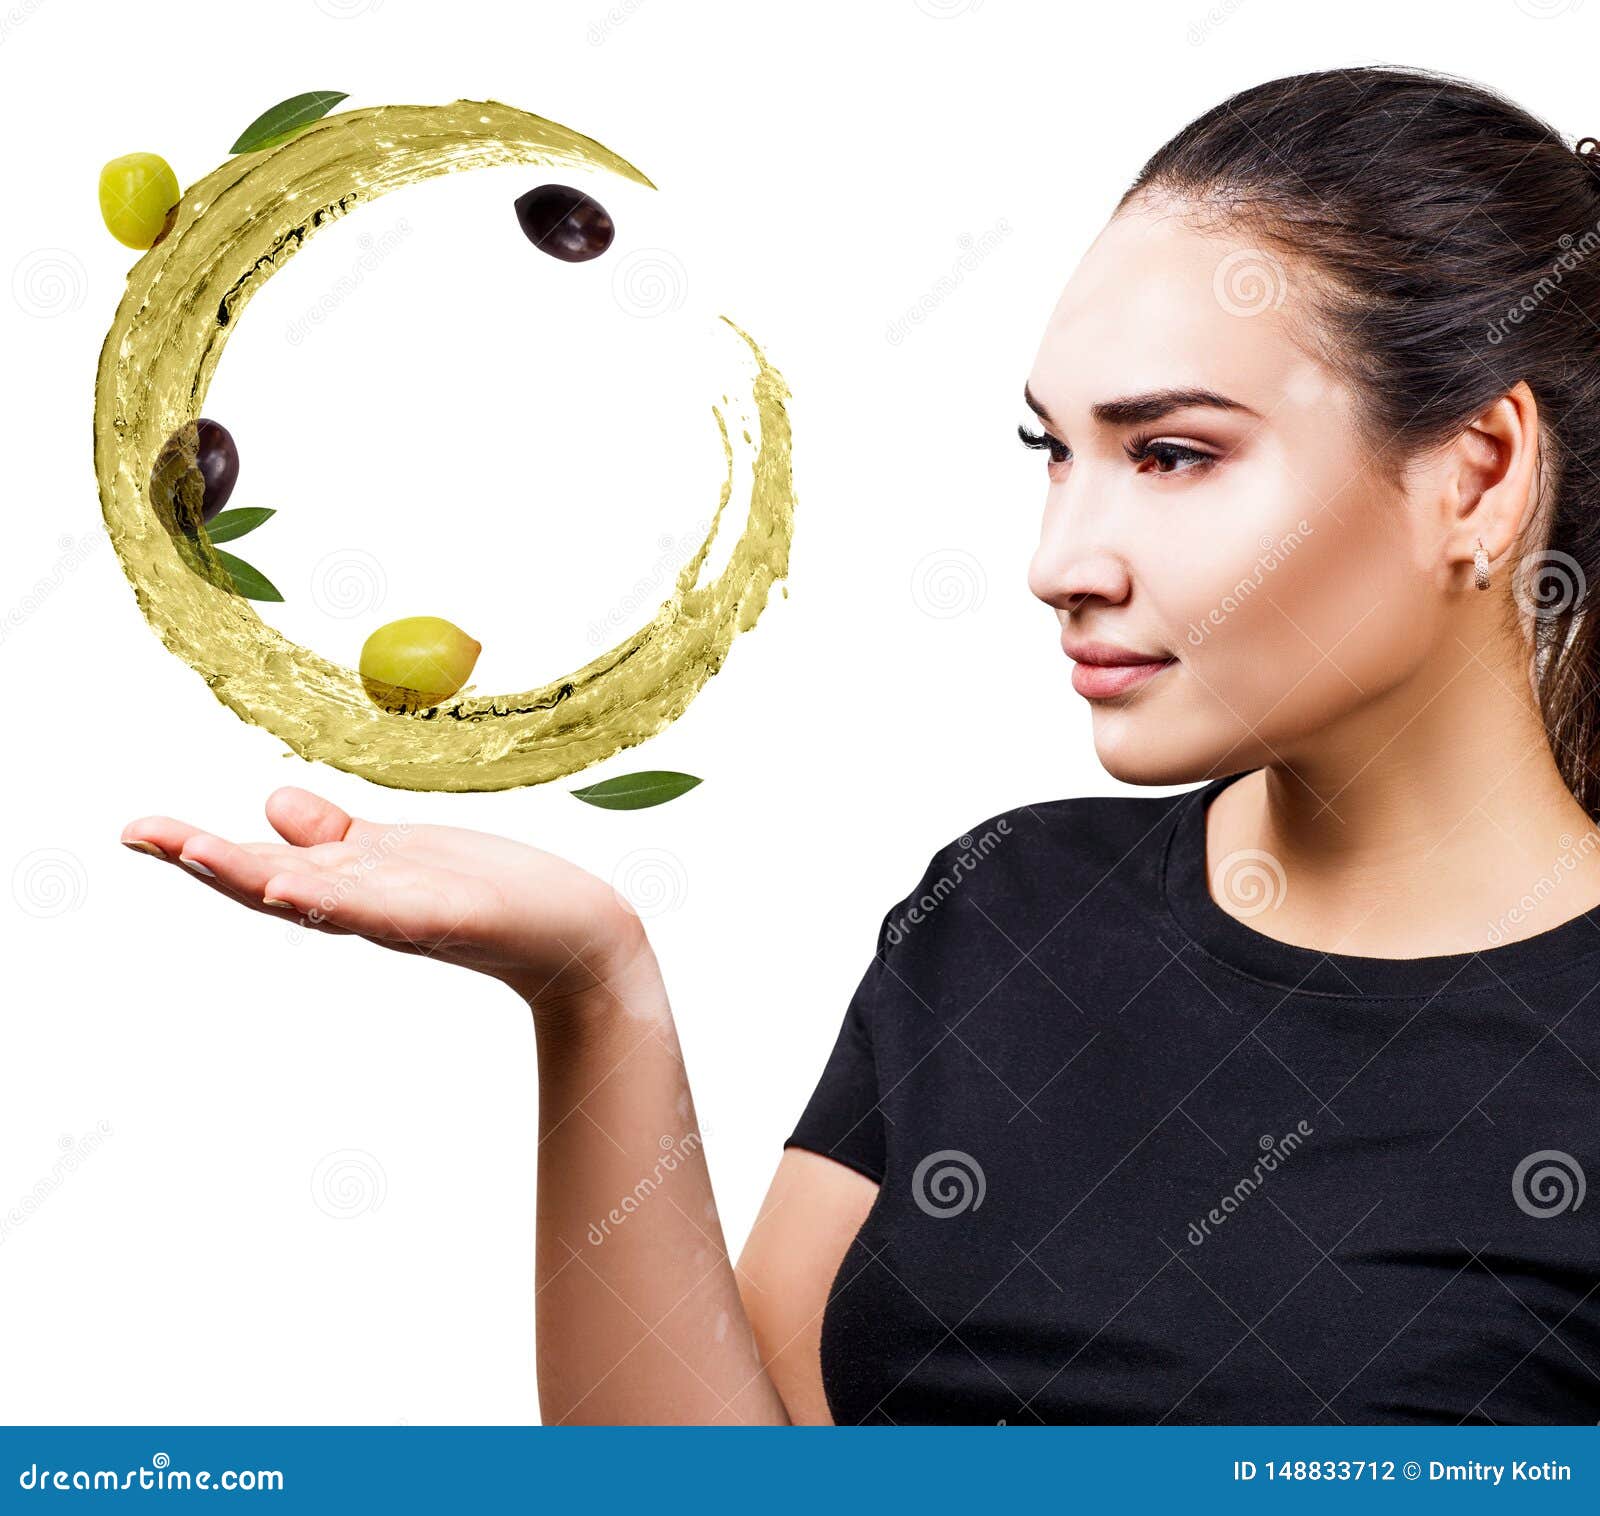 woman shows circulate splash of olive oil with olives in hand.